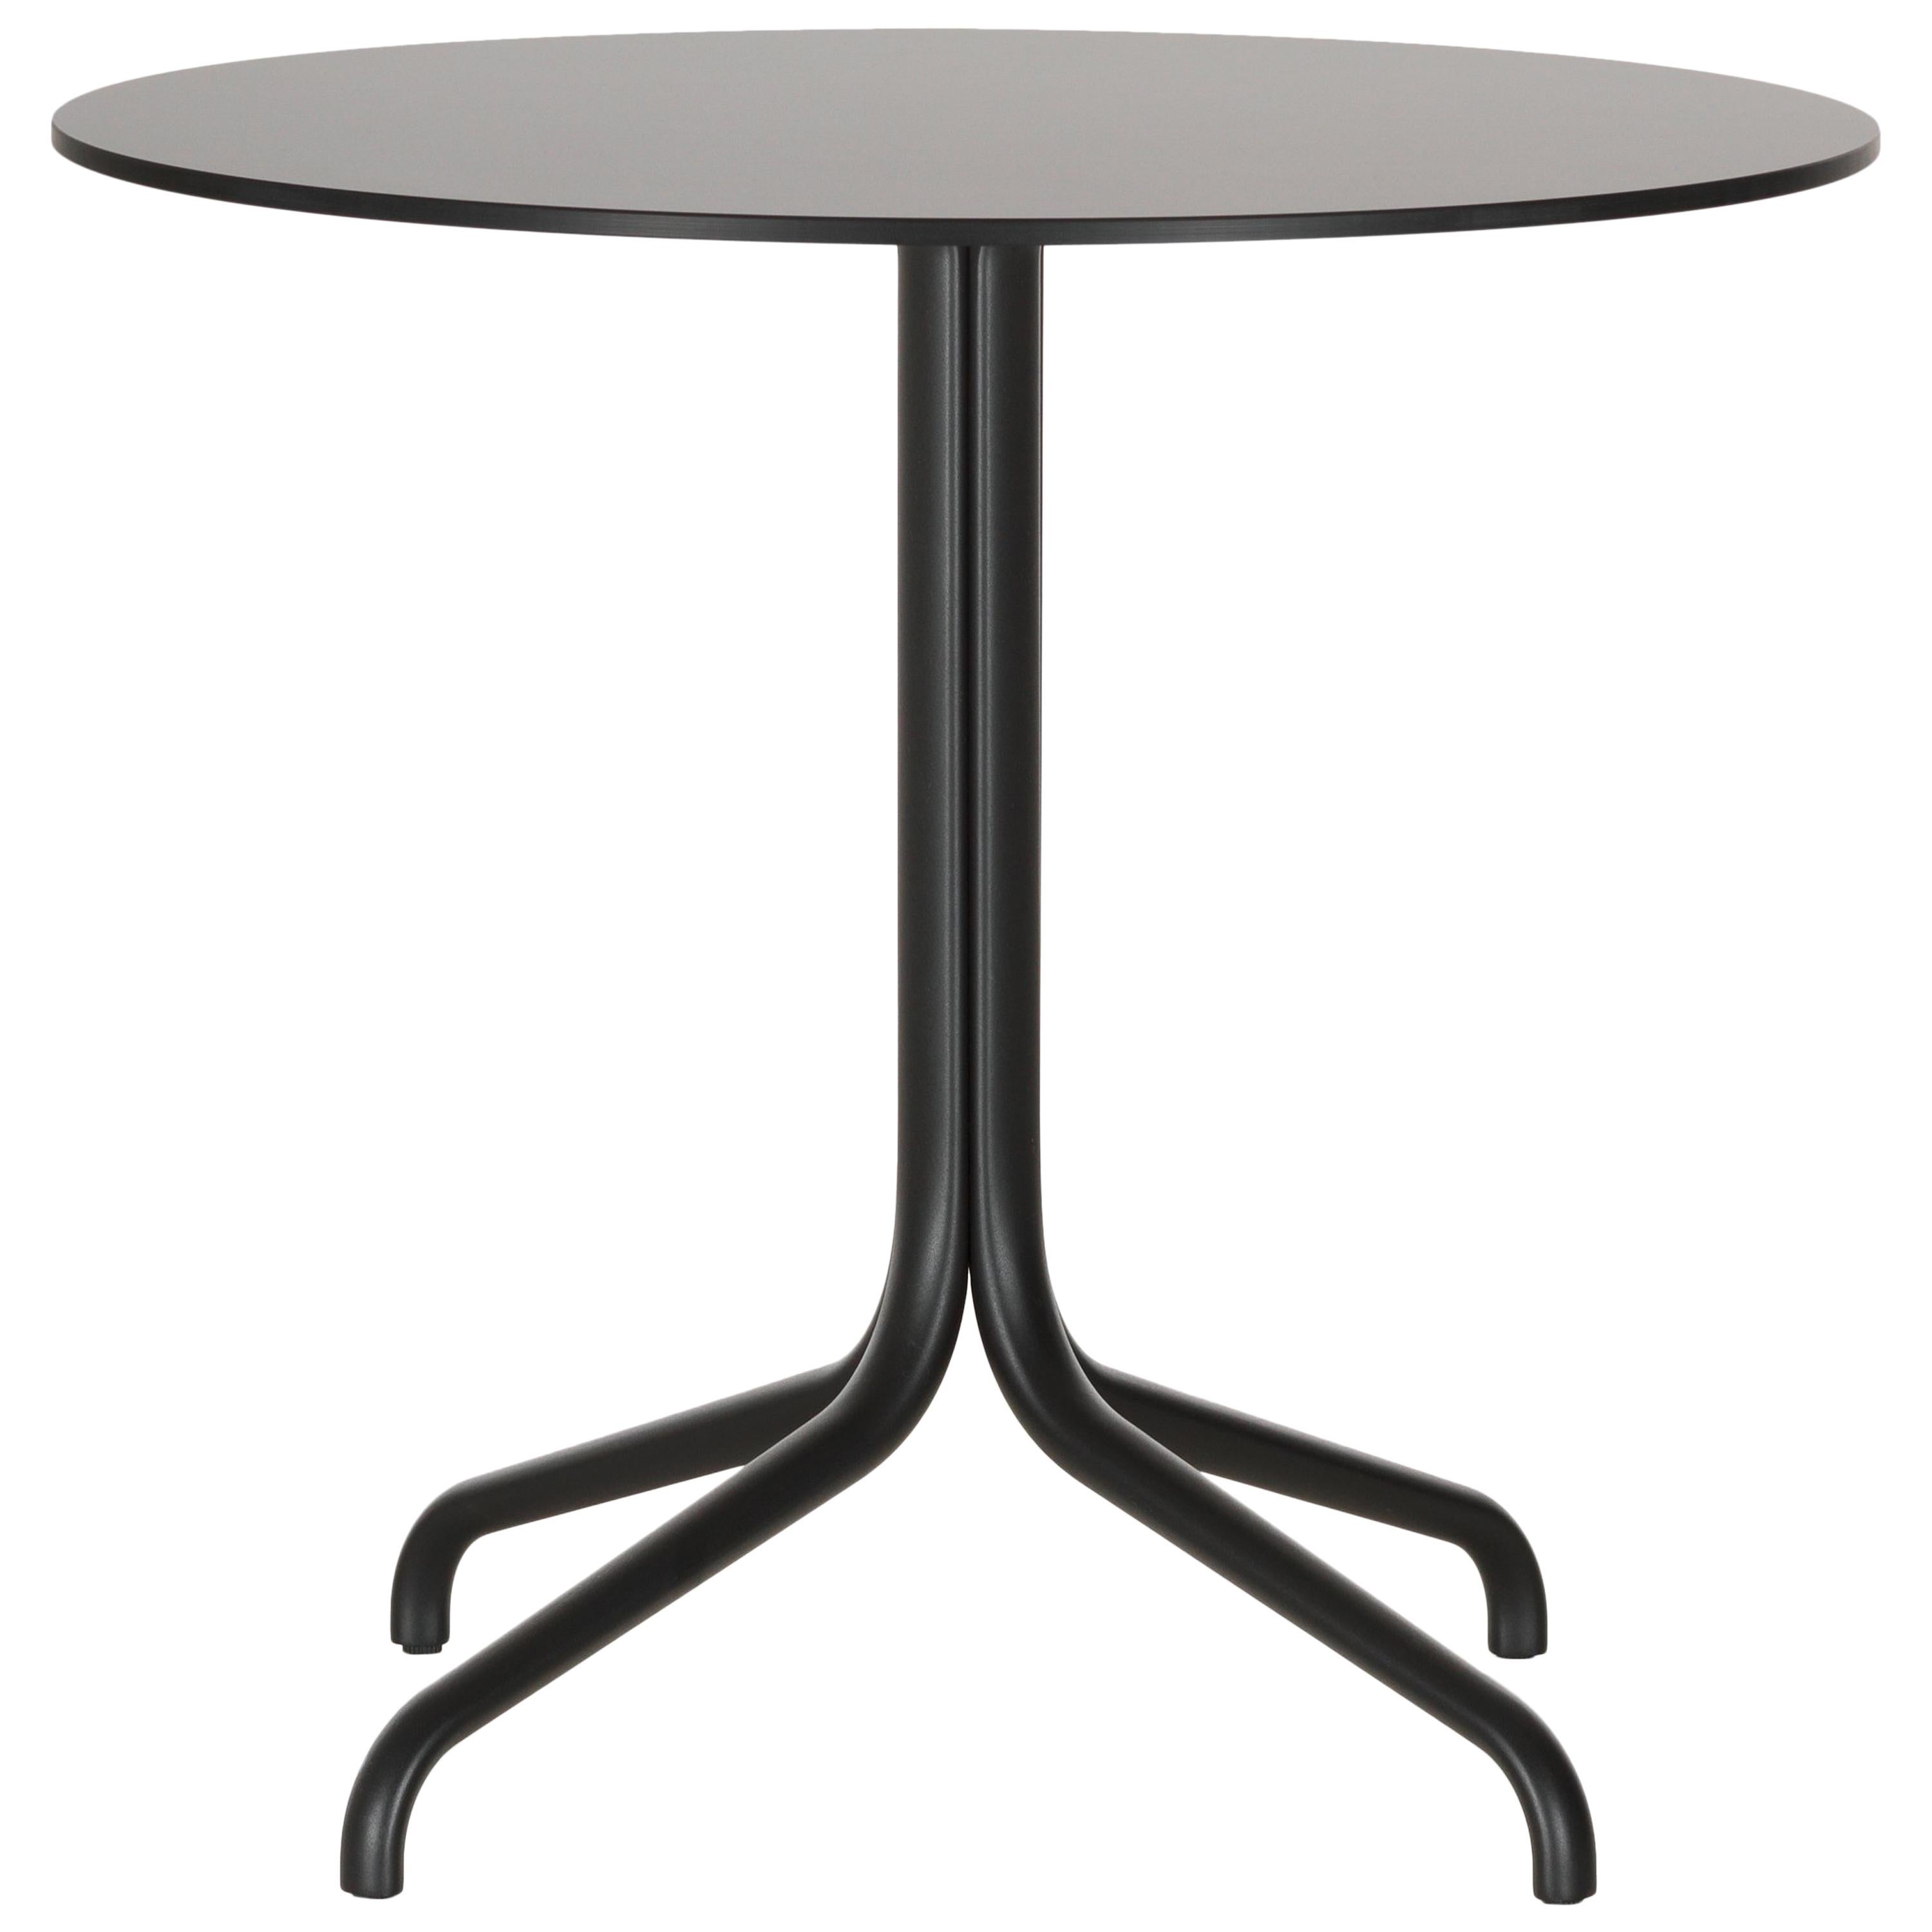 Vitra Belleville Round Table Outdoor in Black by Ronan & Erwan Bouroullec For Sale